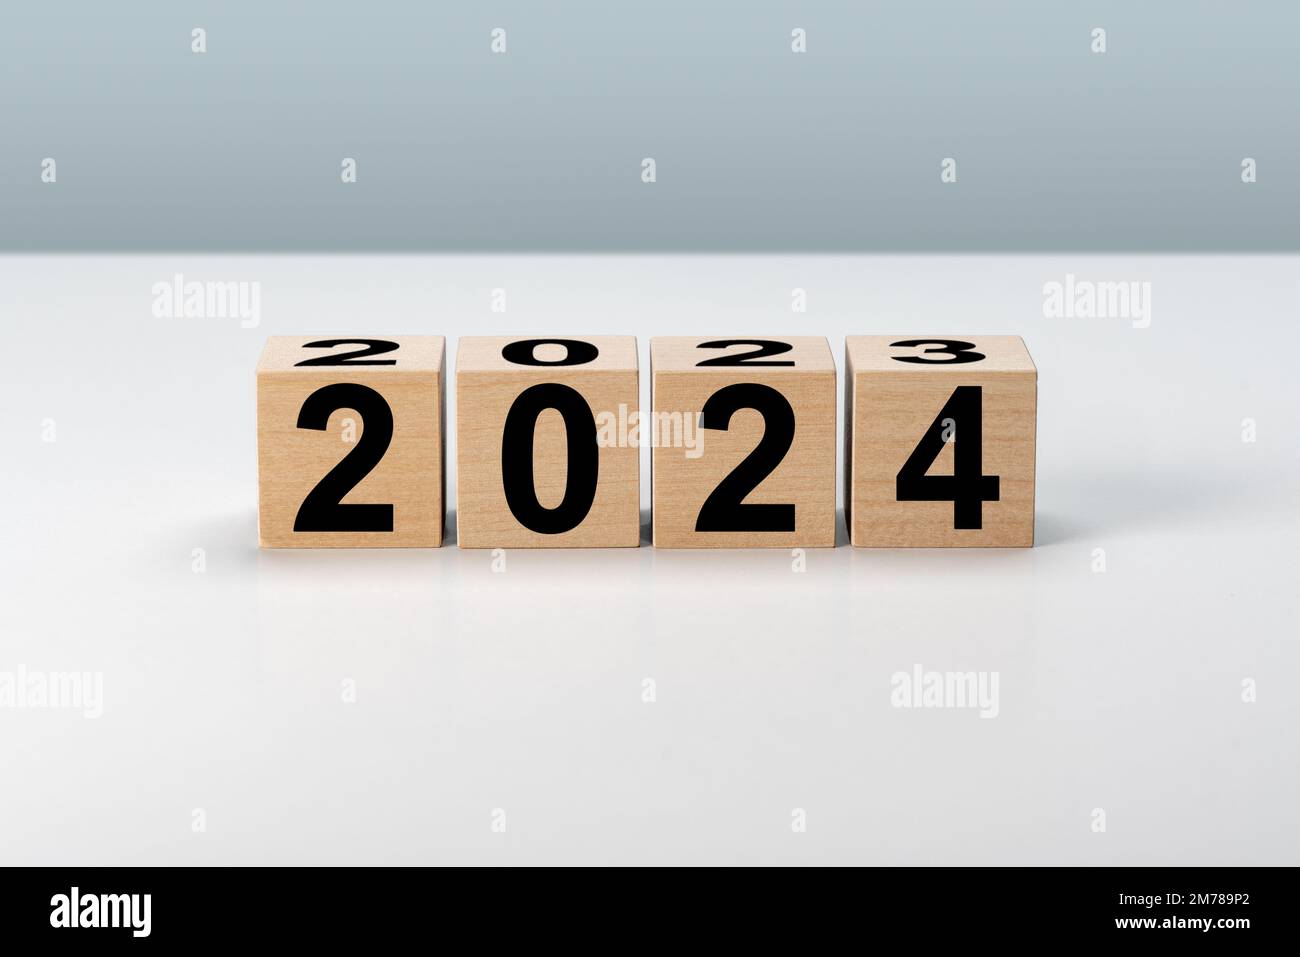 https://c8.alamy.com/comp/2M789P2/2024-new-year-wooden-blocks-2024-on-neutral-grey-background-2023-to-2024-on-wooden-block-cube-for-preparation-new-year-change-and-start-new-business-2M789P2.jpg